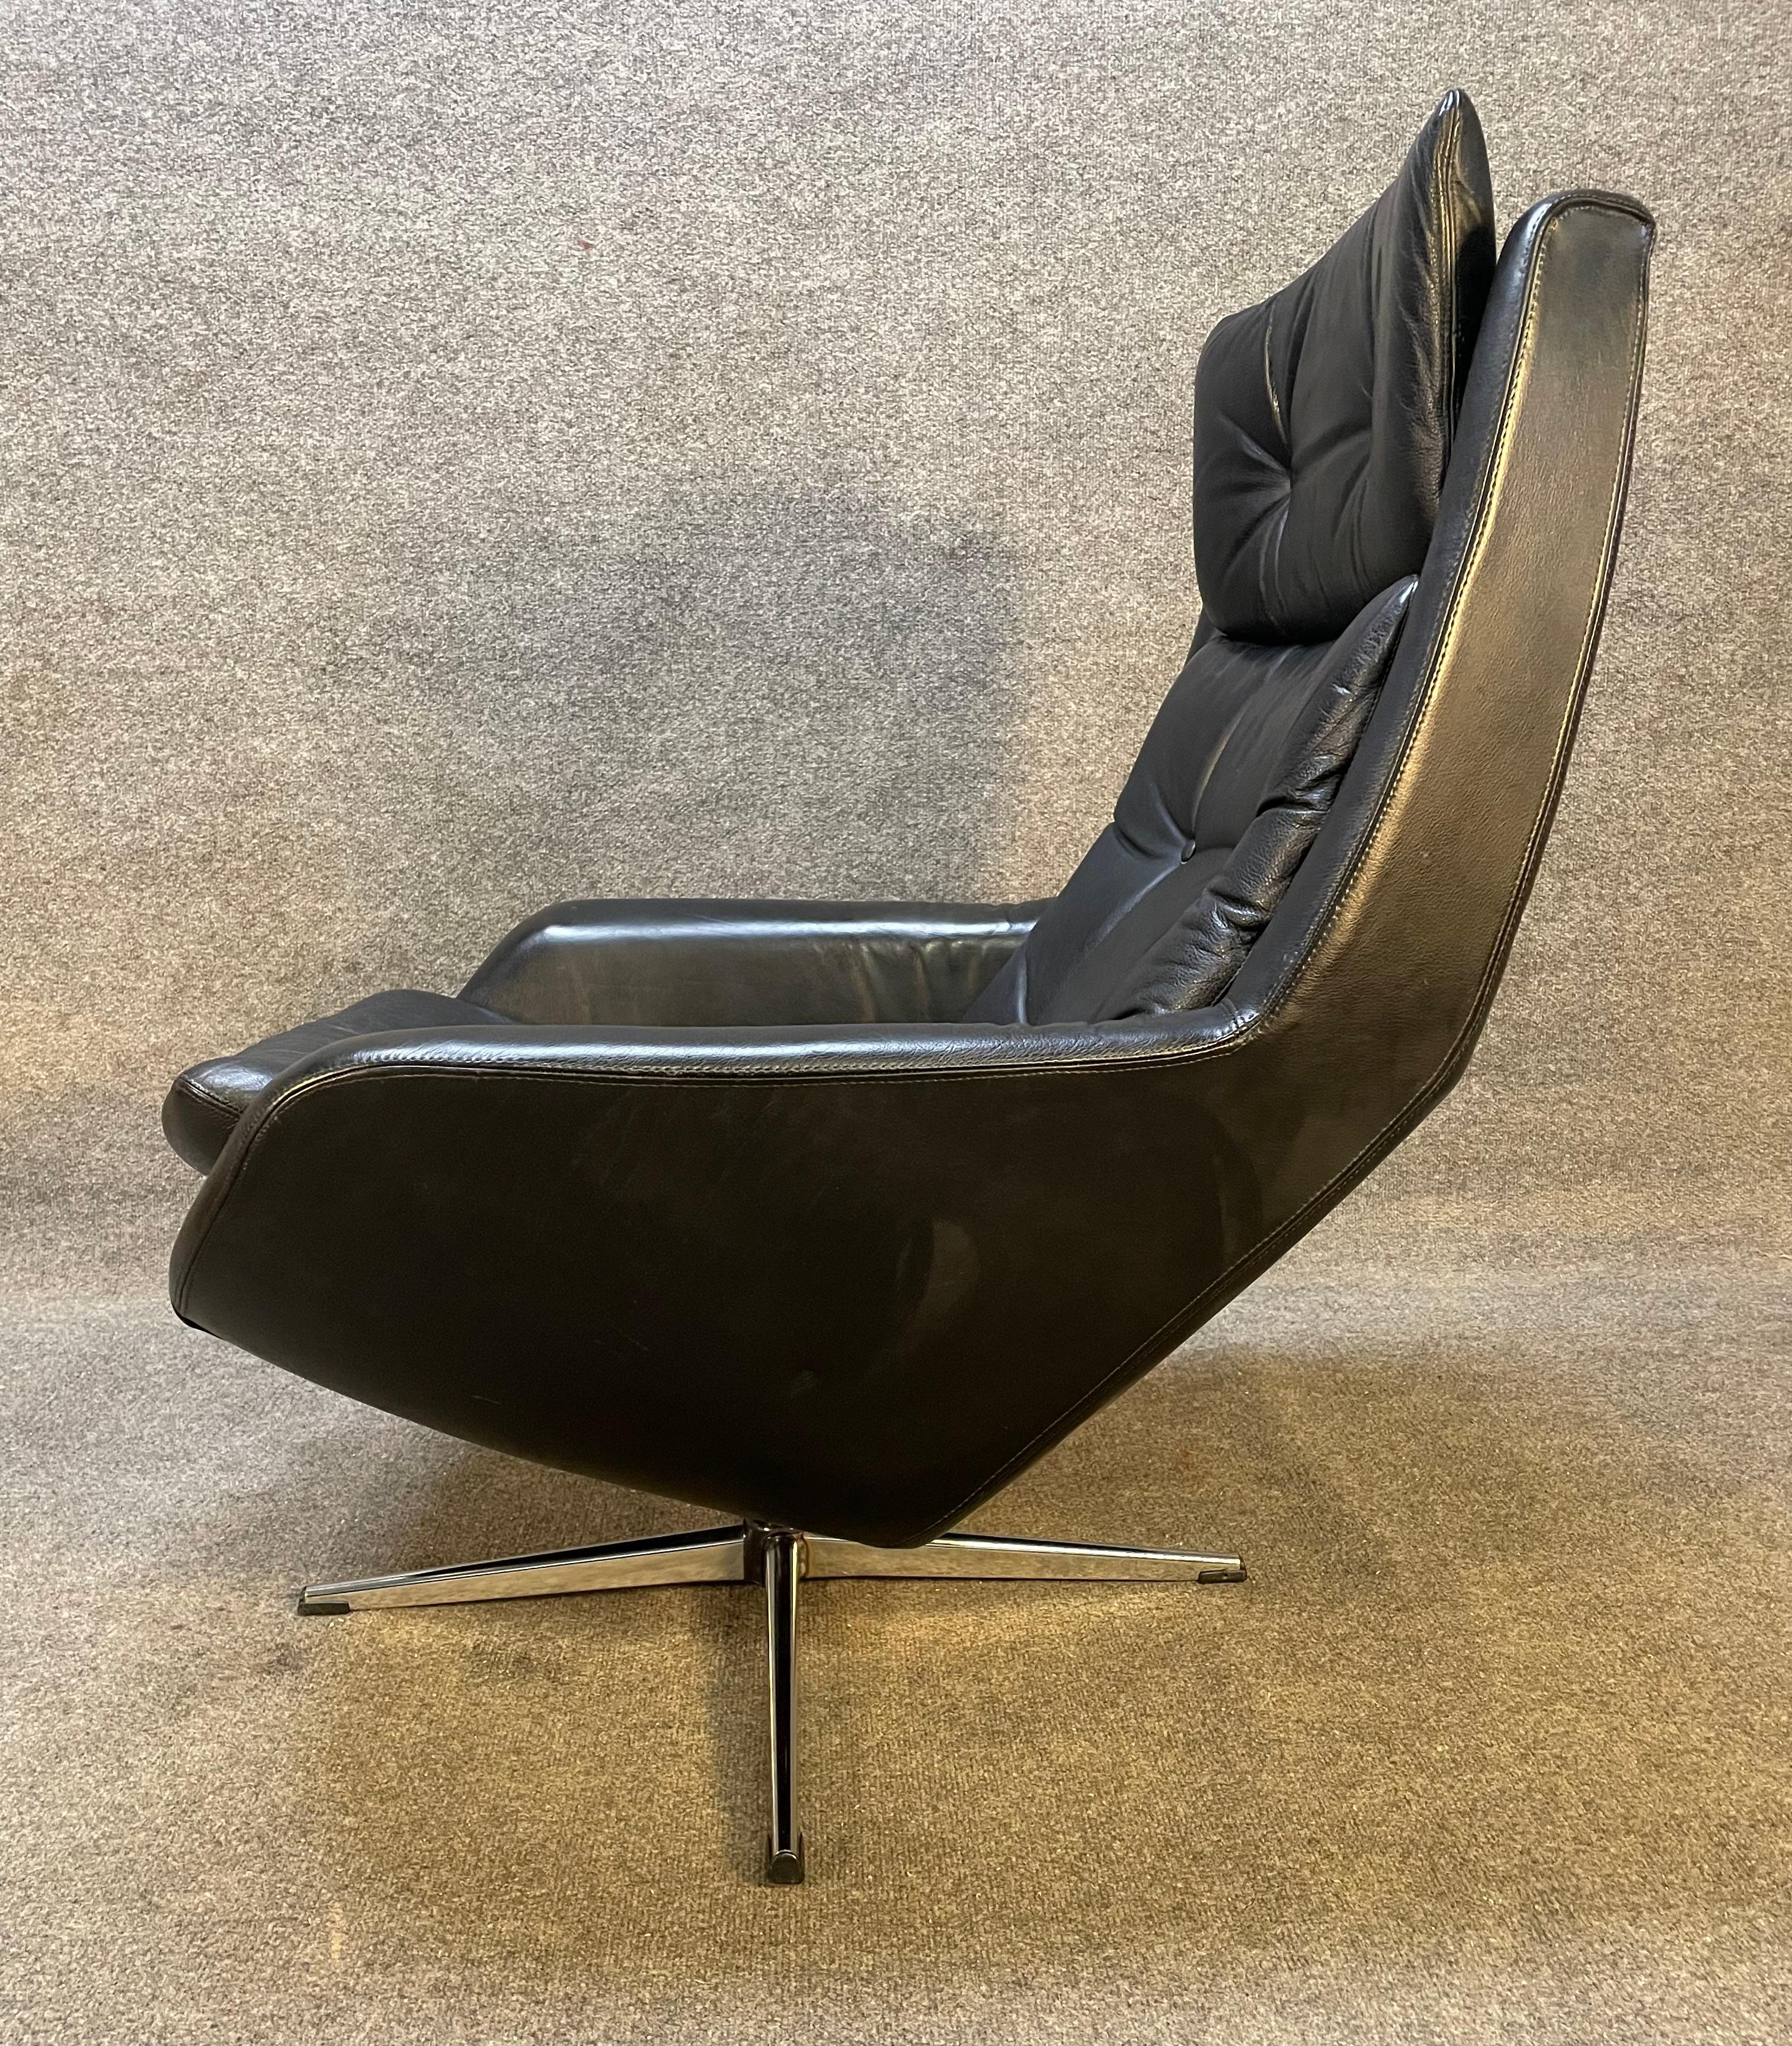 Mid-20th Century Vintage Danish Mid-Century Modern Leather Lounge Chair by Hw Klein for Bramin